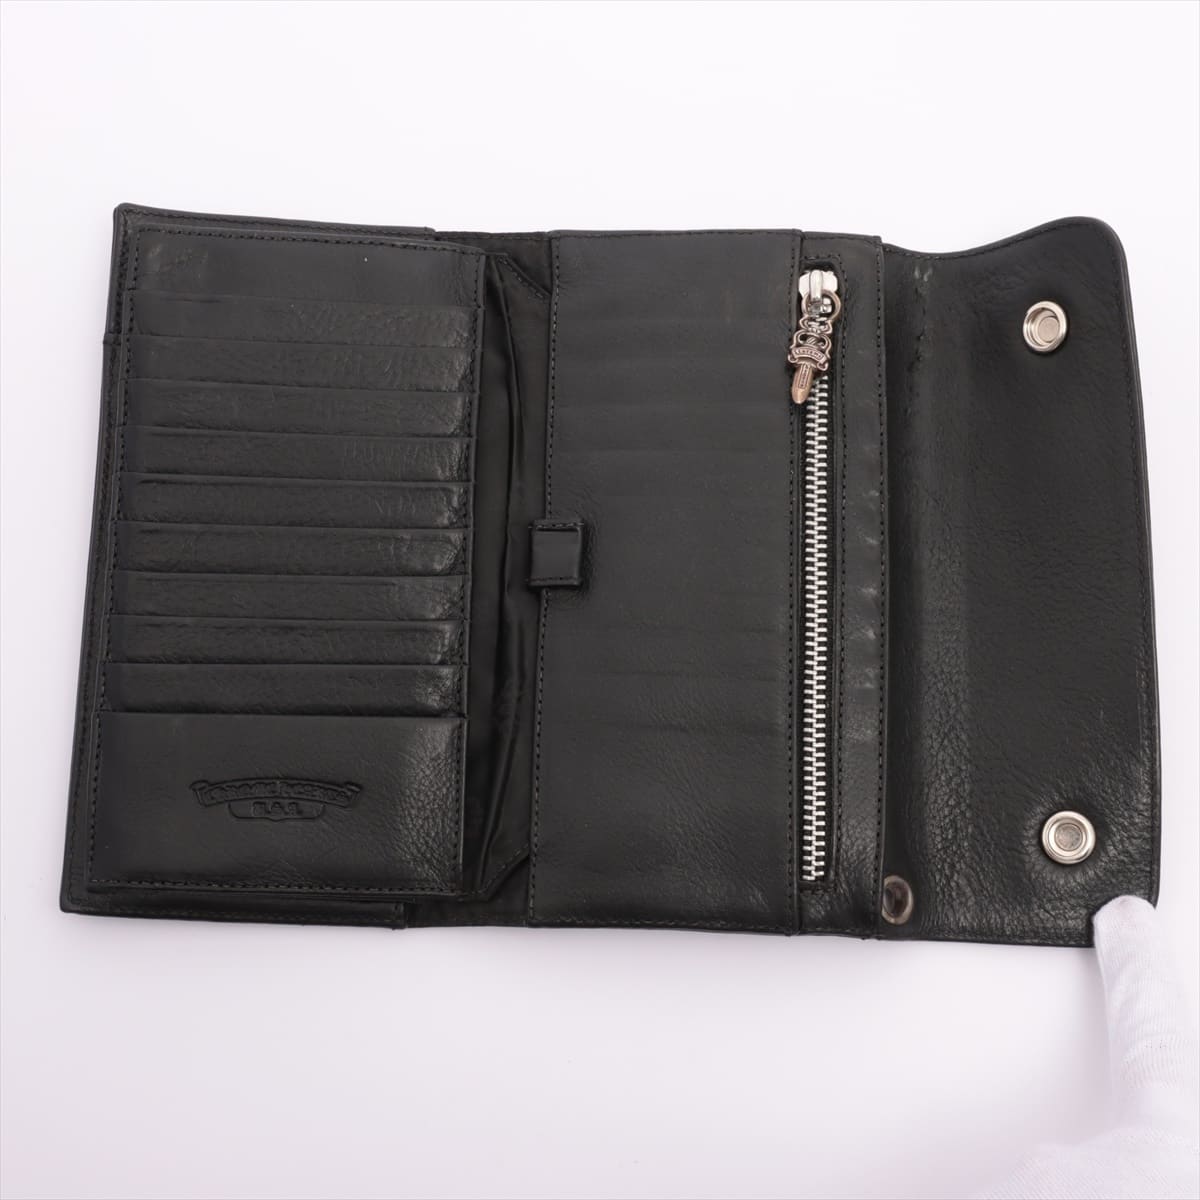 Chrome Hearts Wave Wallet Wallet Leather With invoice Cross button Dagger zip